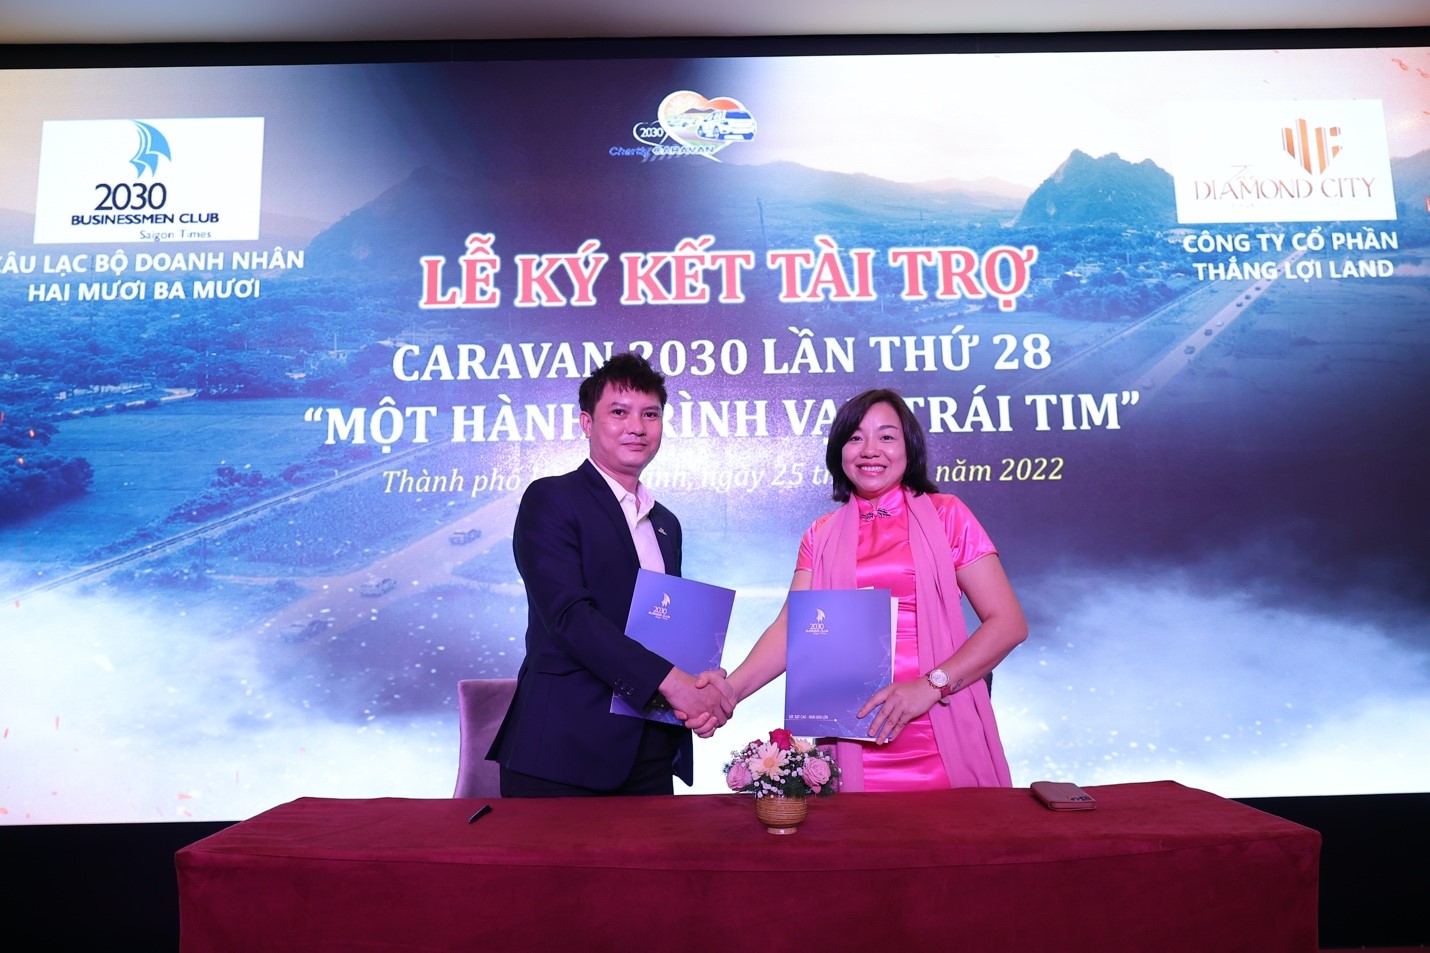 Thang Loi Group continues to sponsor the 28th Caravan 2030